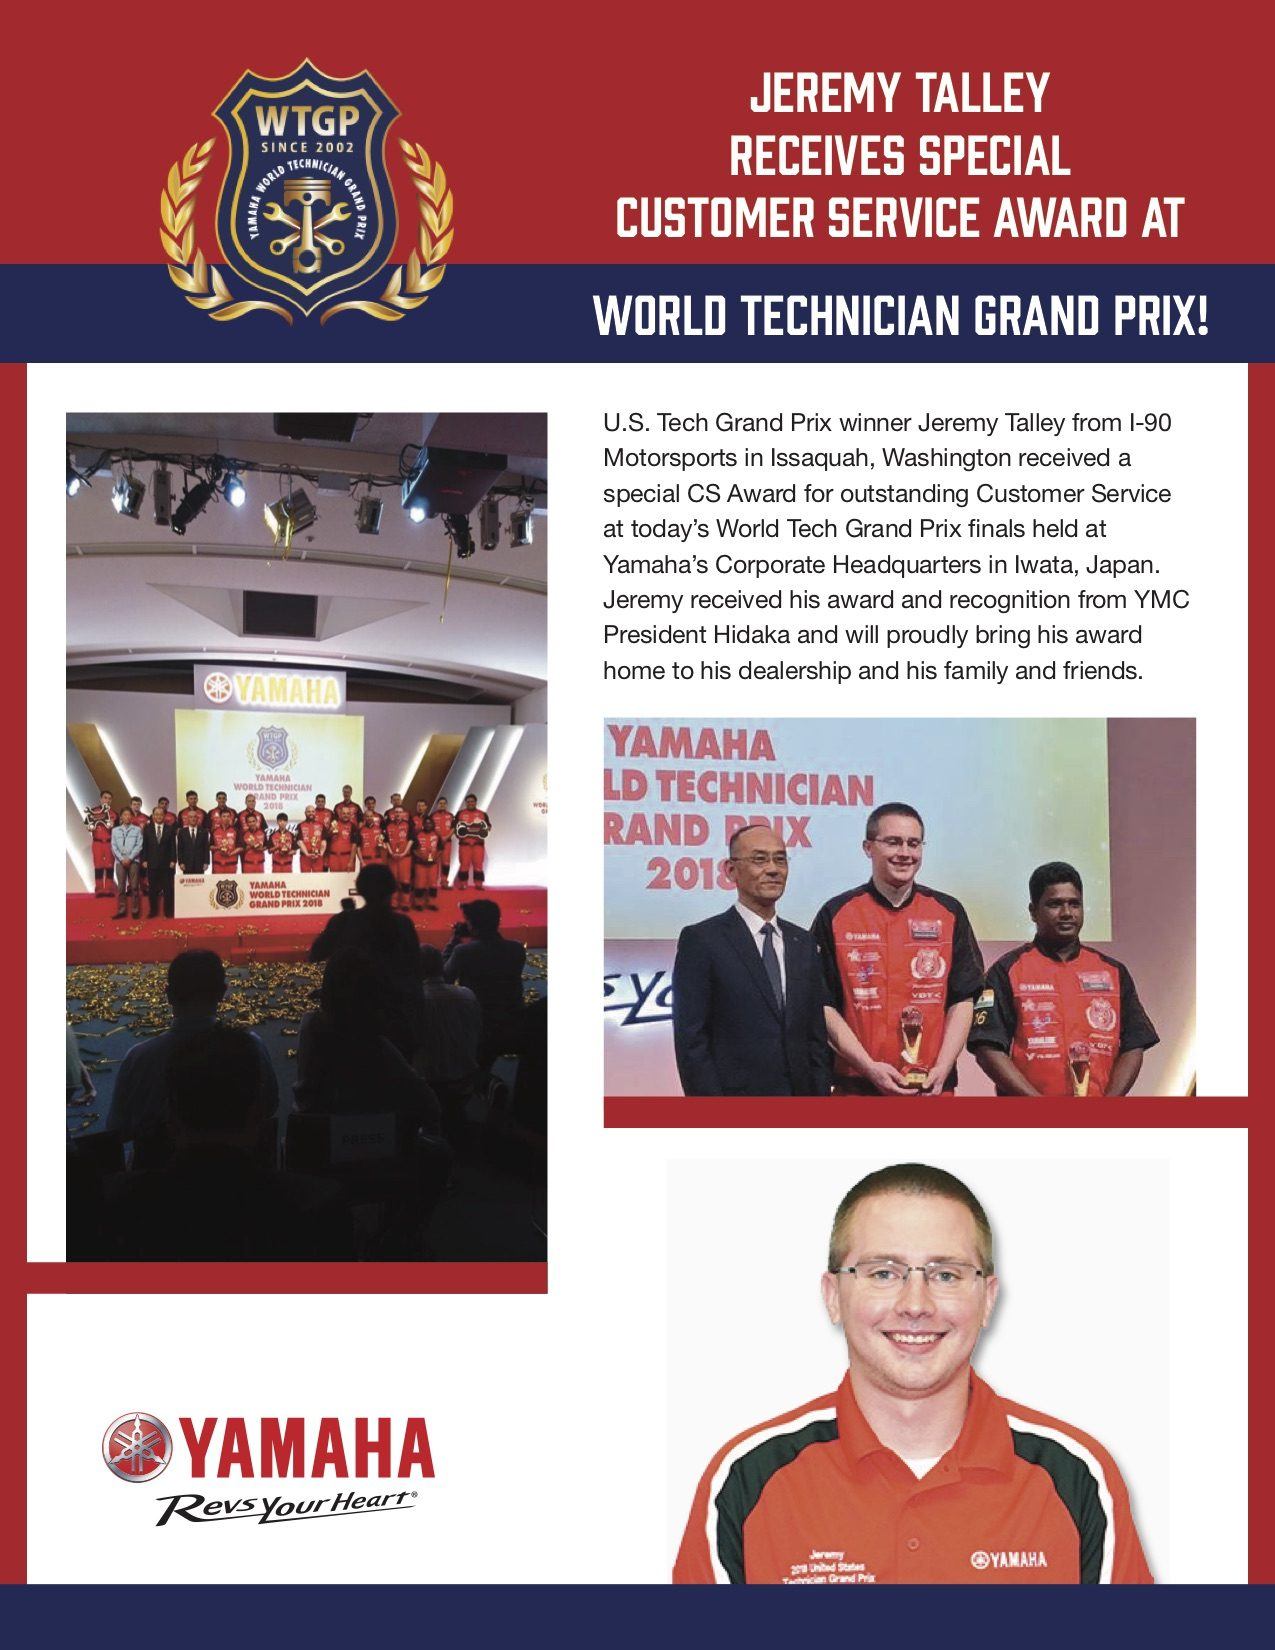 Jeremy Talley receives special customer service award at World Technician Grand Prix